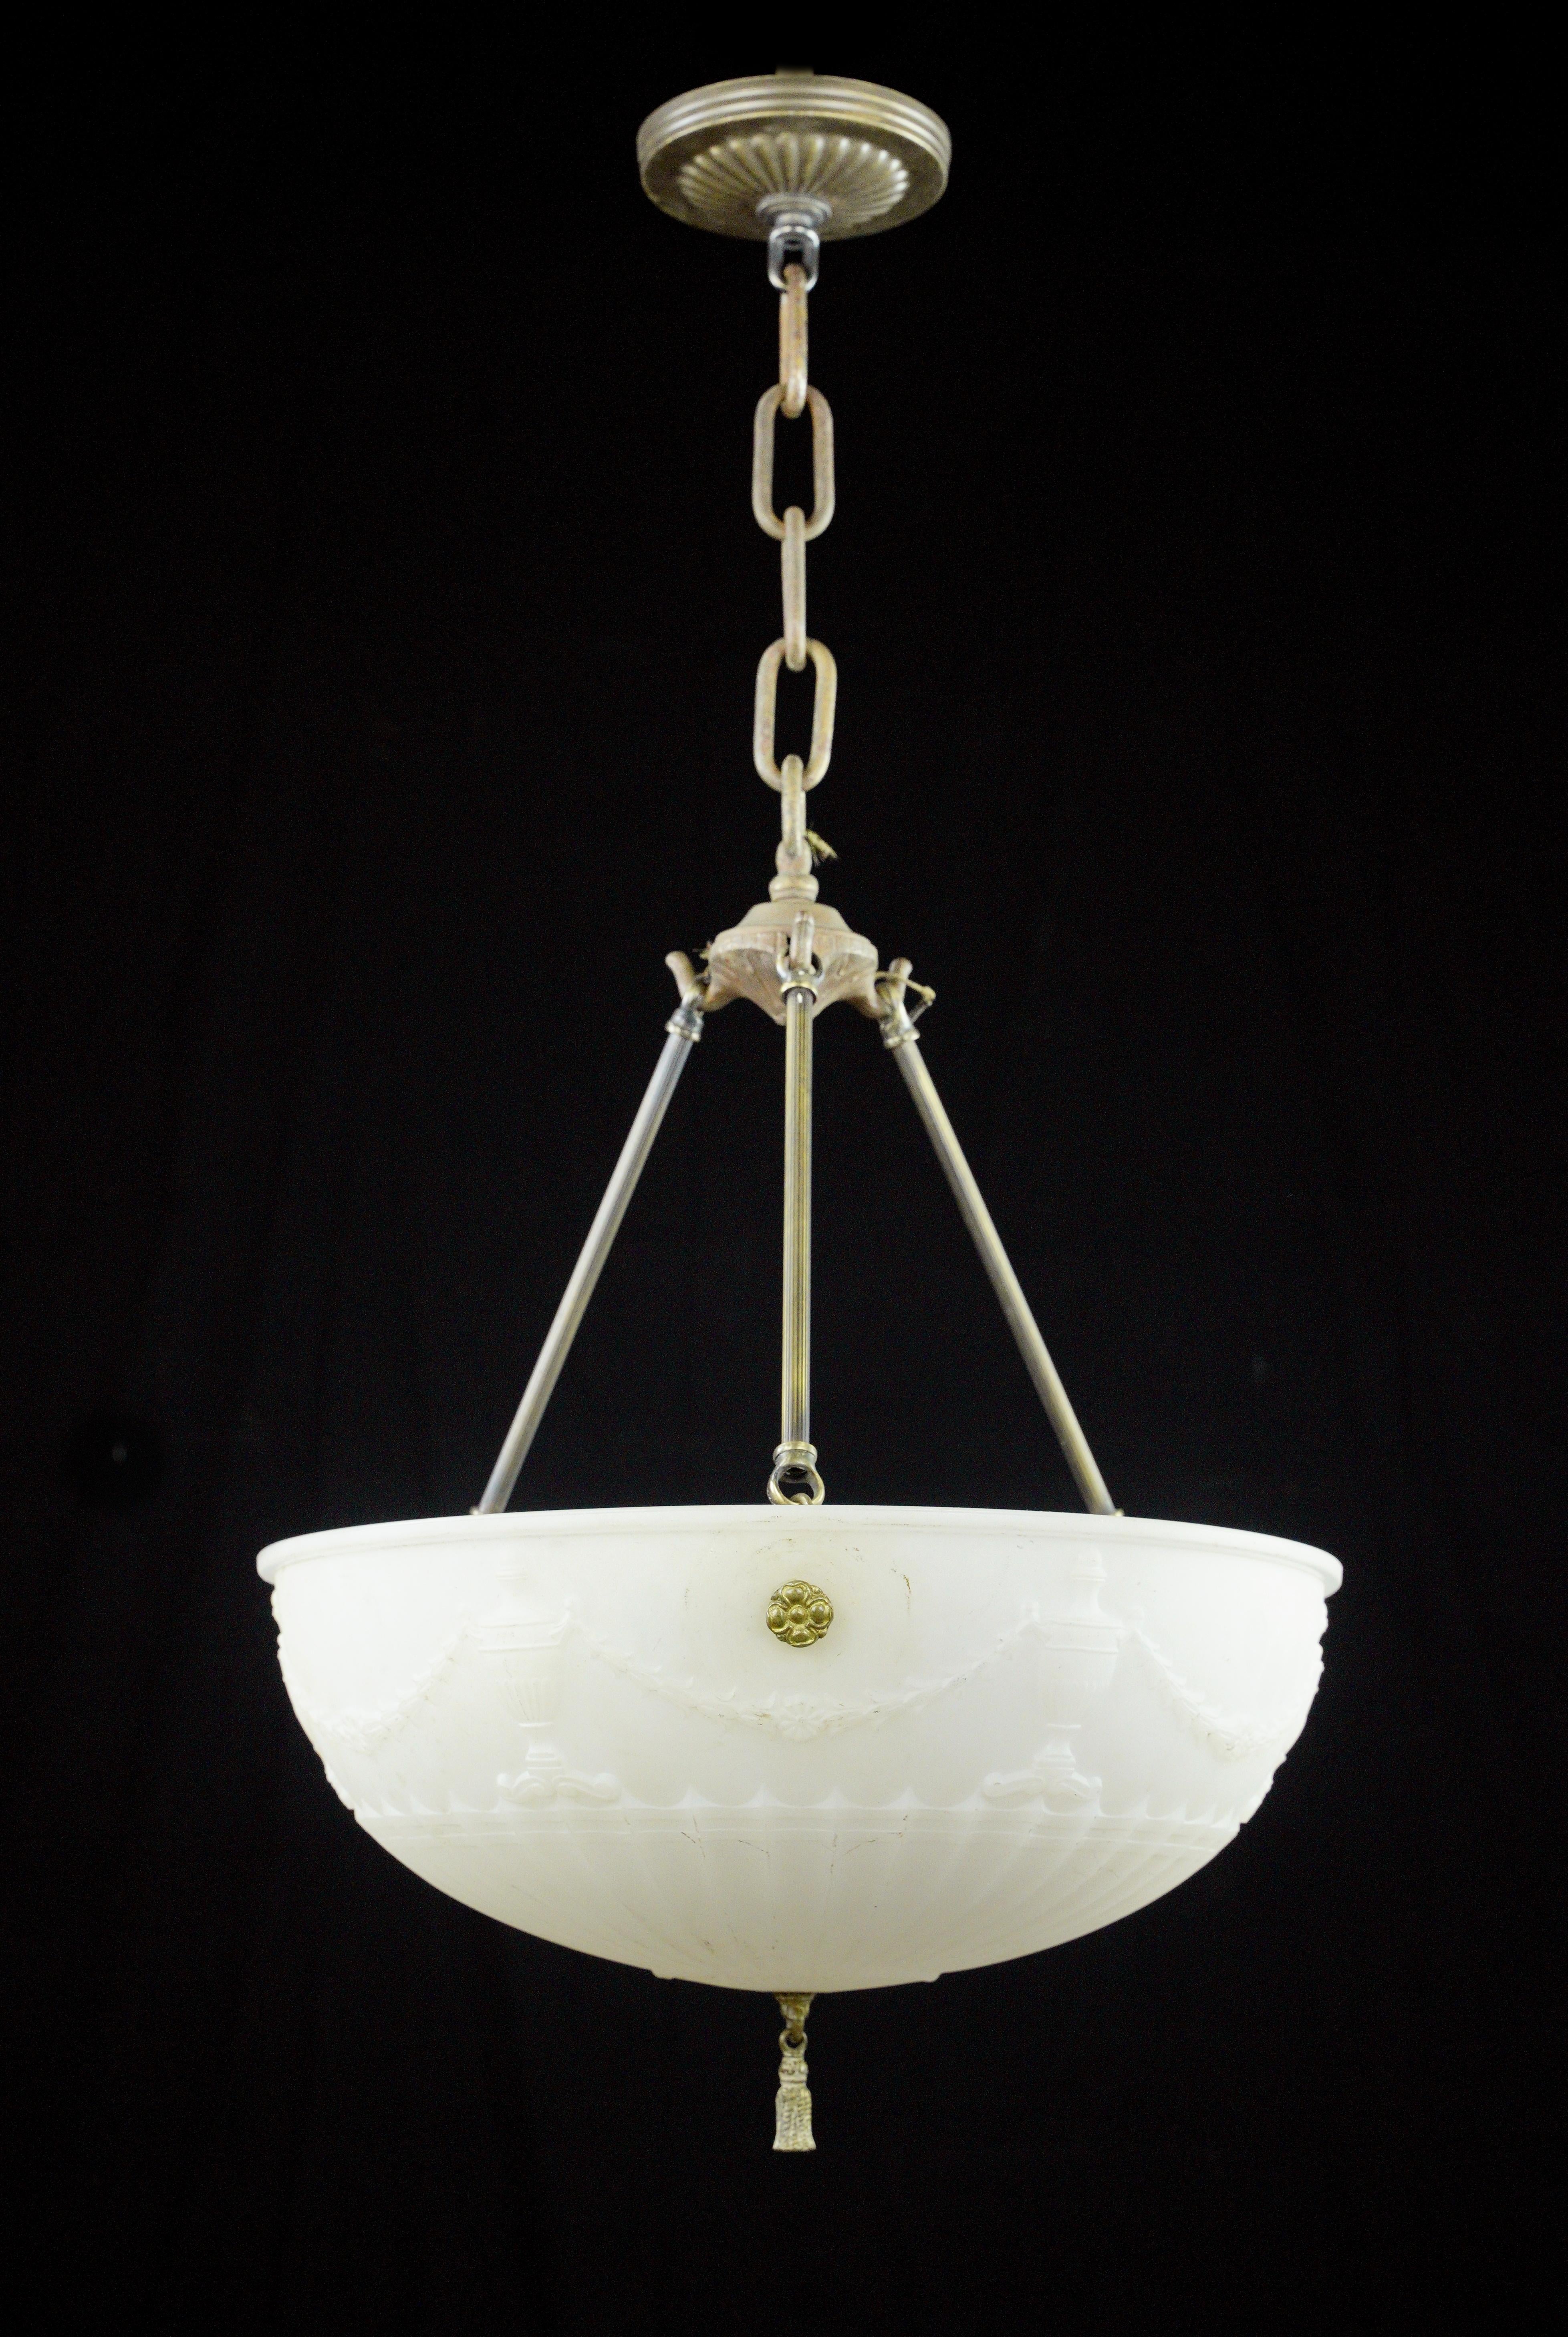 This Victorian brass pendant light embodies vintage charm. Its white cast glass dish with a radial urn design exudes elegance, complemented by a brass fixture, making it a captivating addition to any Victorian inspired decor. Takes three standard